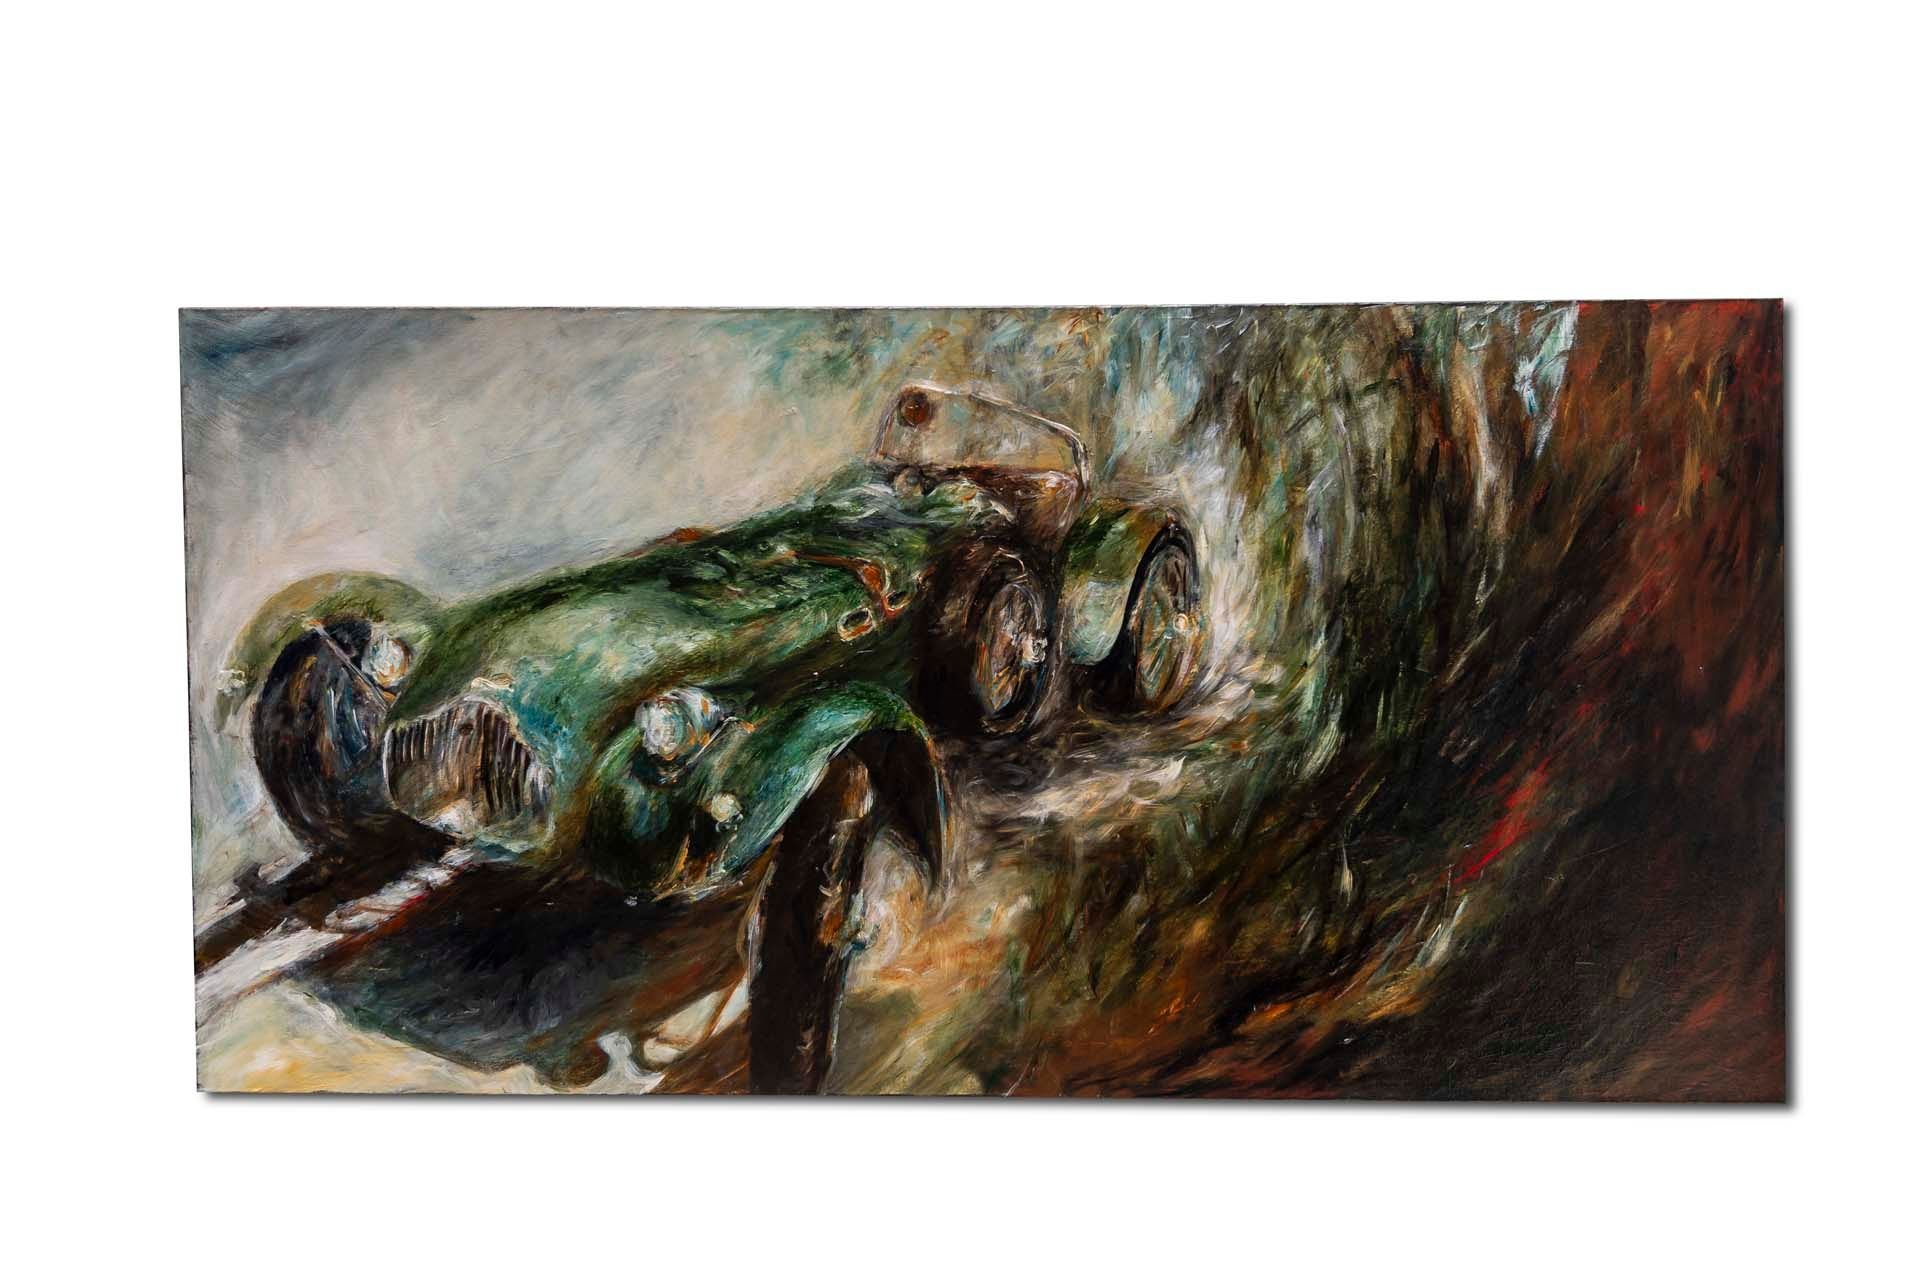 For Sale 'Allard' Oil Painting